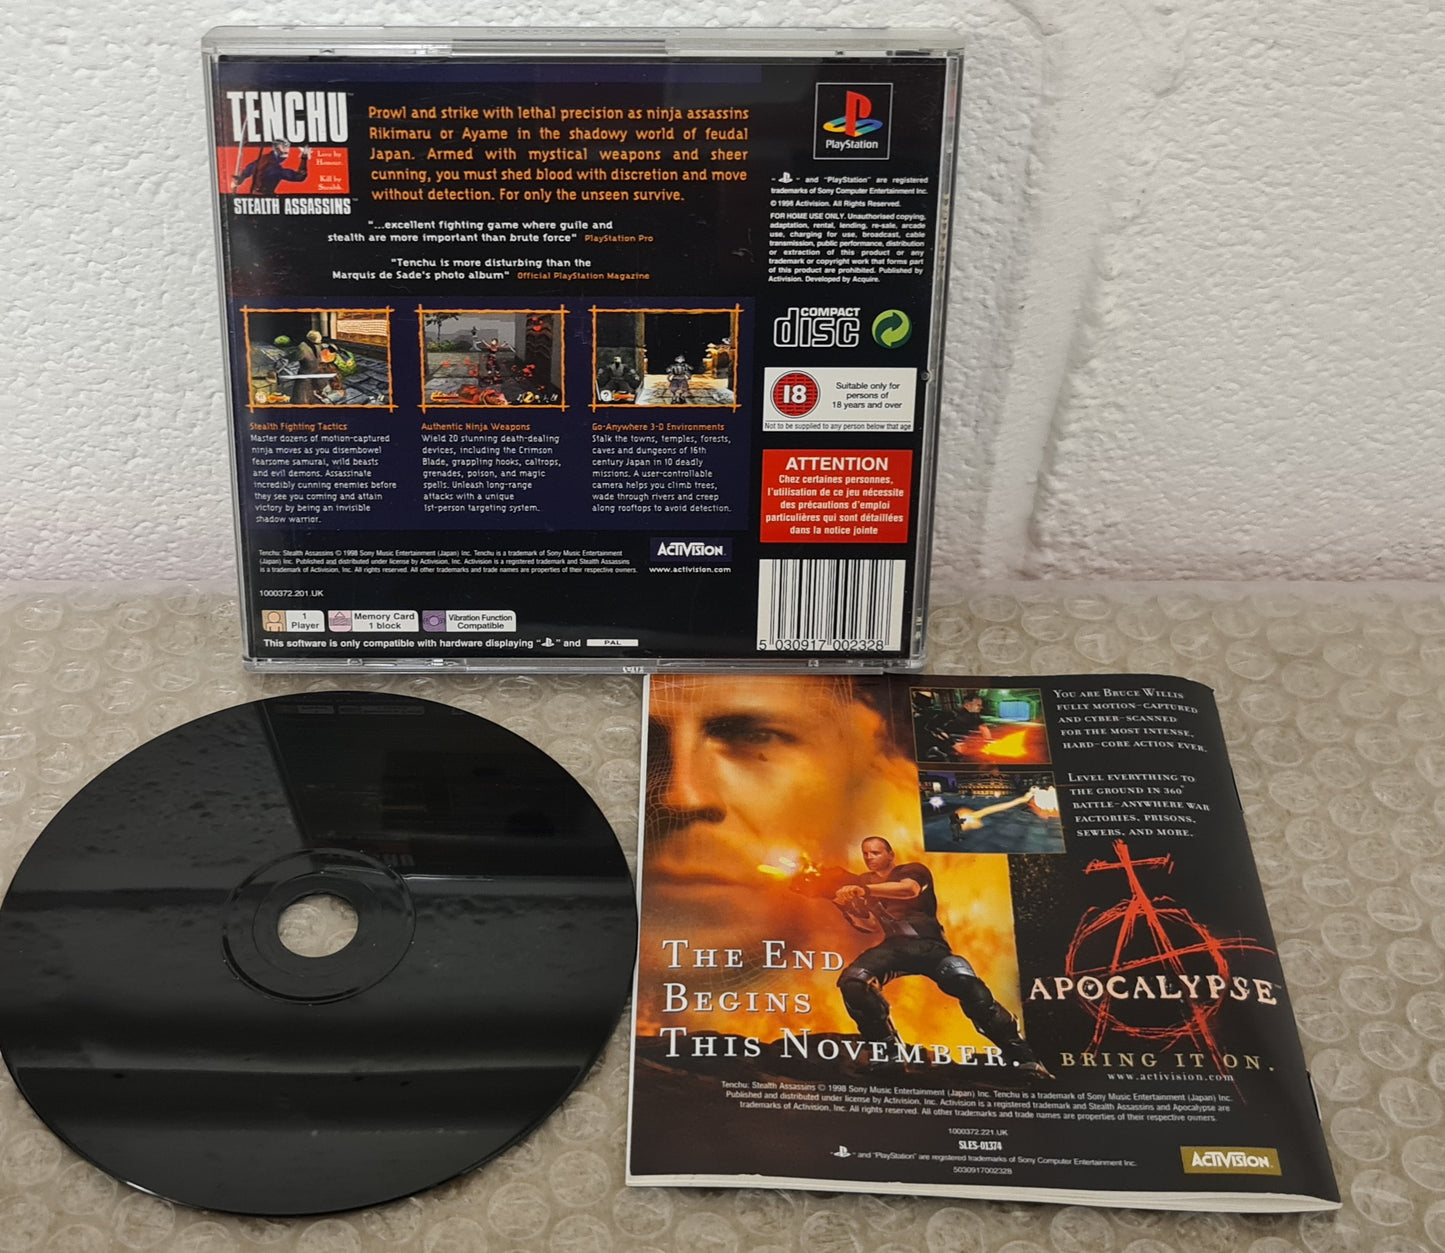 Tenchu Stealth Assassins Sony Playstation 1 (PS1) Game